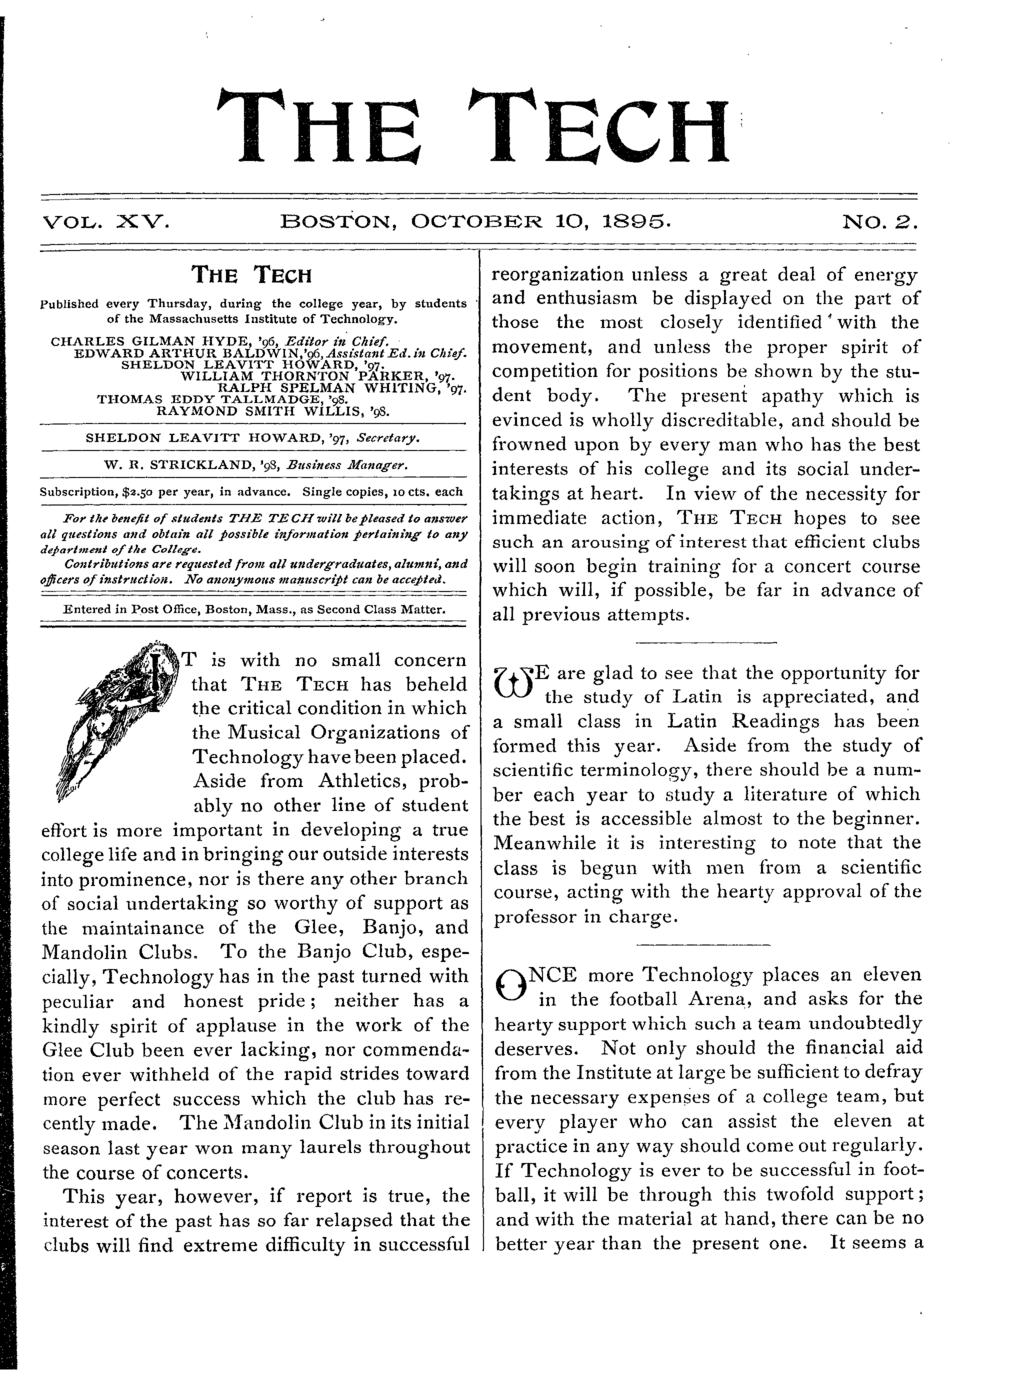 THE TECH VOL. XV. BOSTON, OCTOBE:R 10, 1895. NO. 2. THE TECH Publshed every Thursday, durng the college year, by students of the Massachusetts nsttute of Technology.